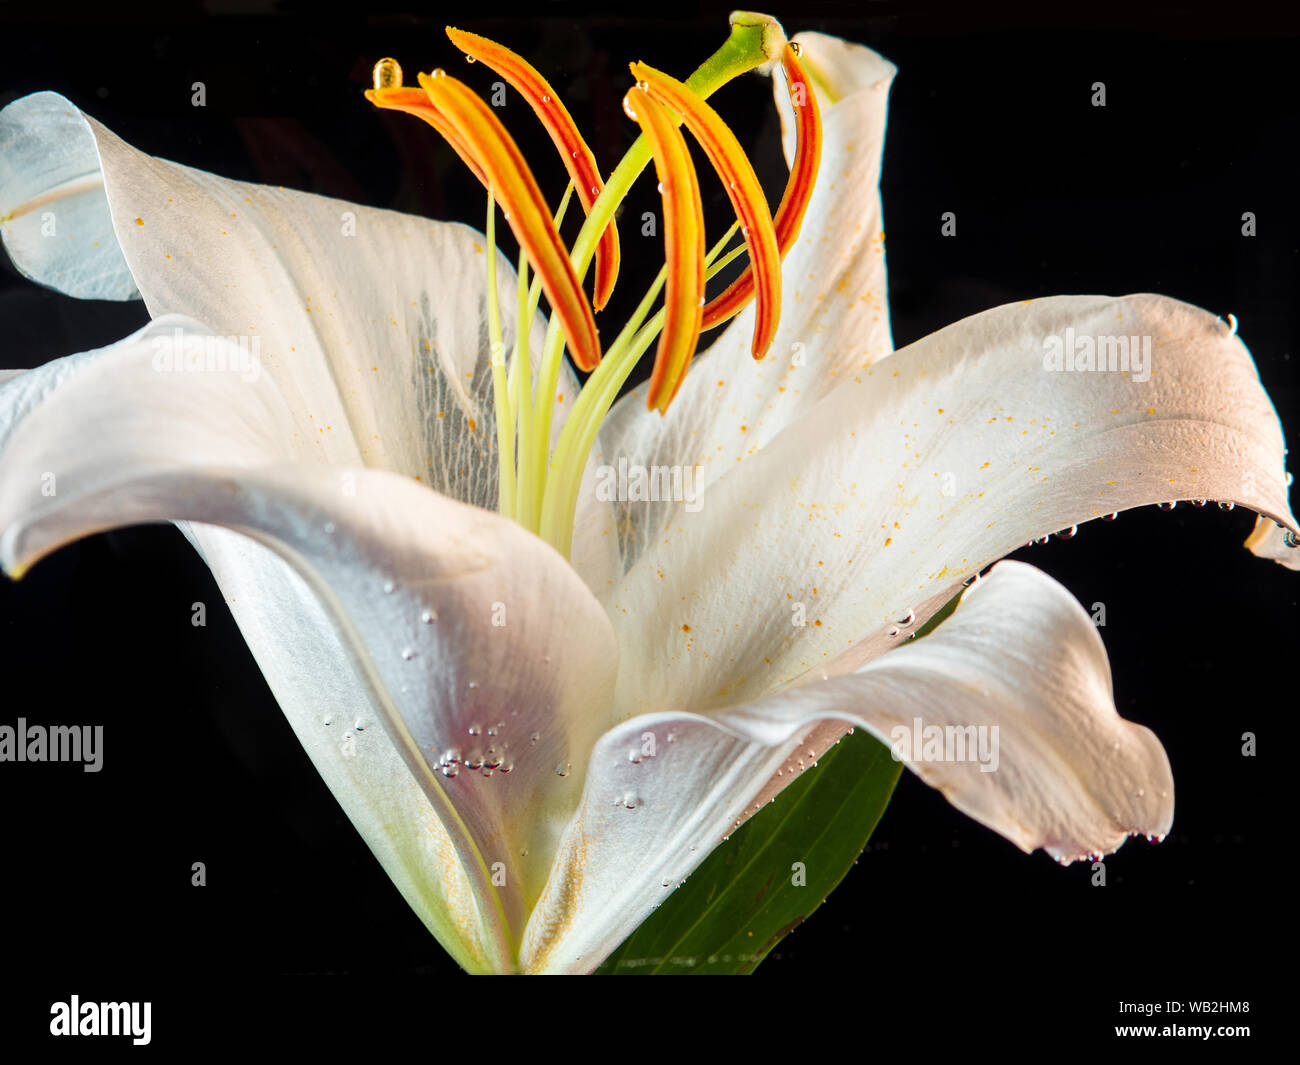 White Lily under water. Lily flower on a black background immersed in water. Stock Photo